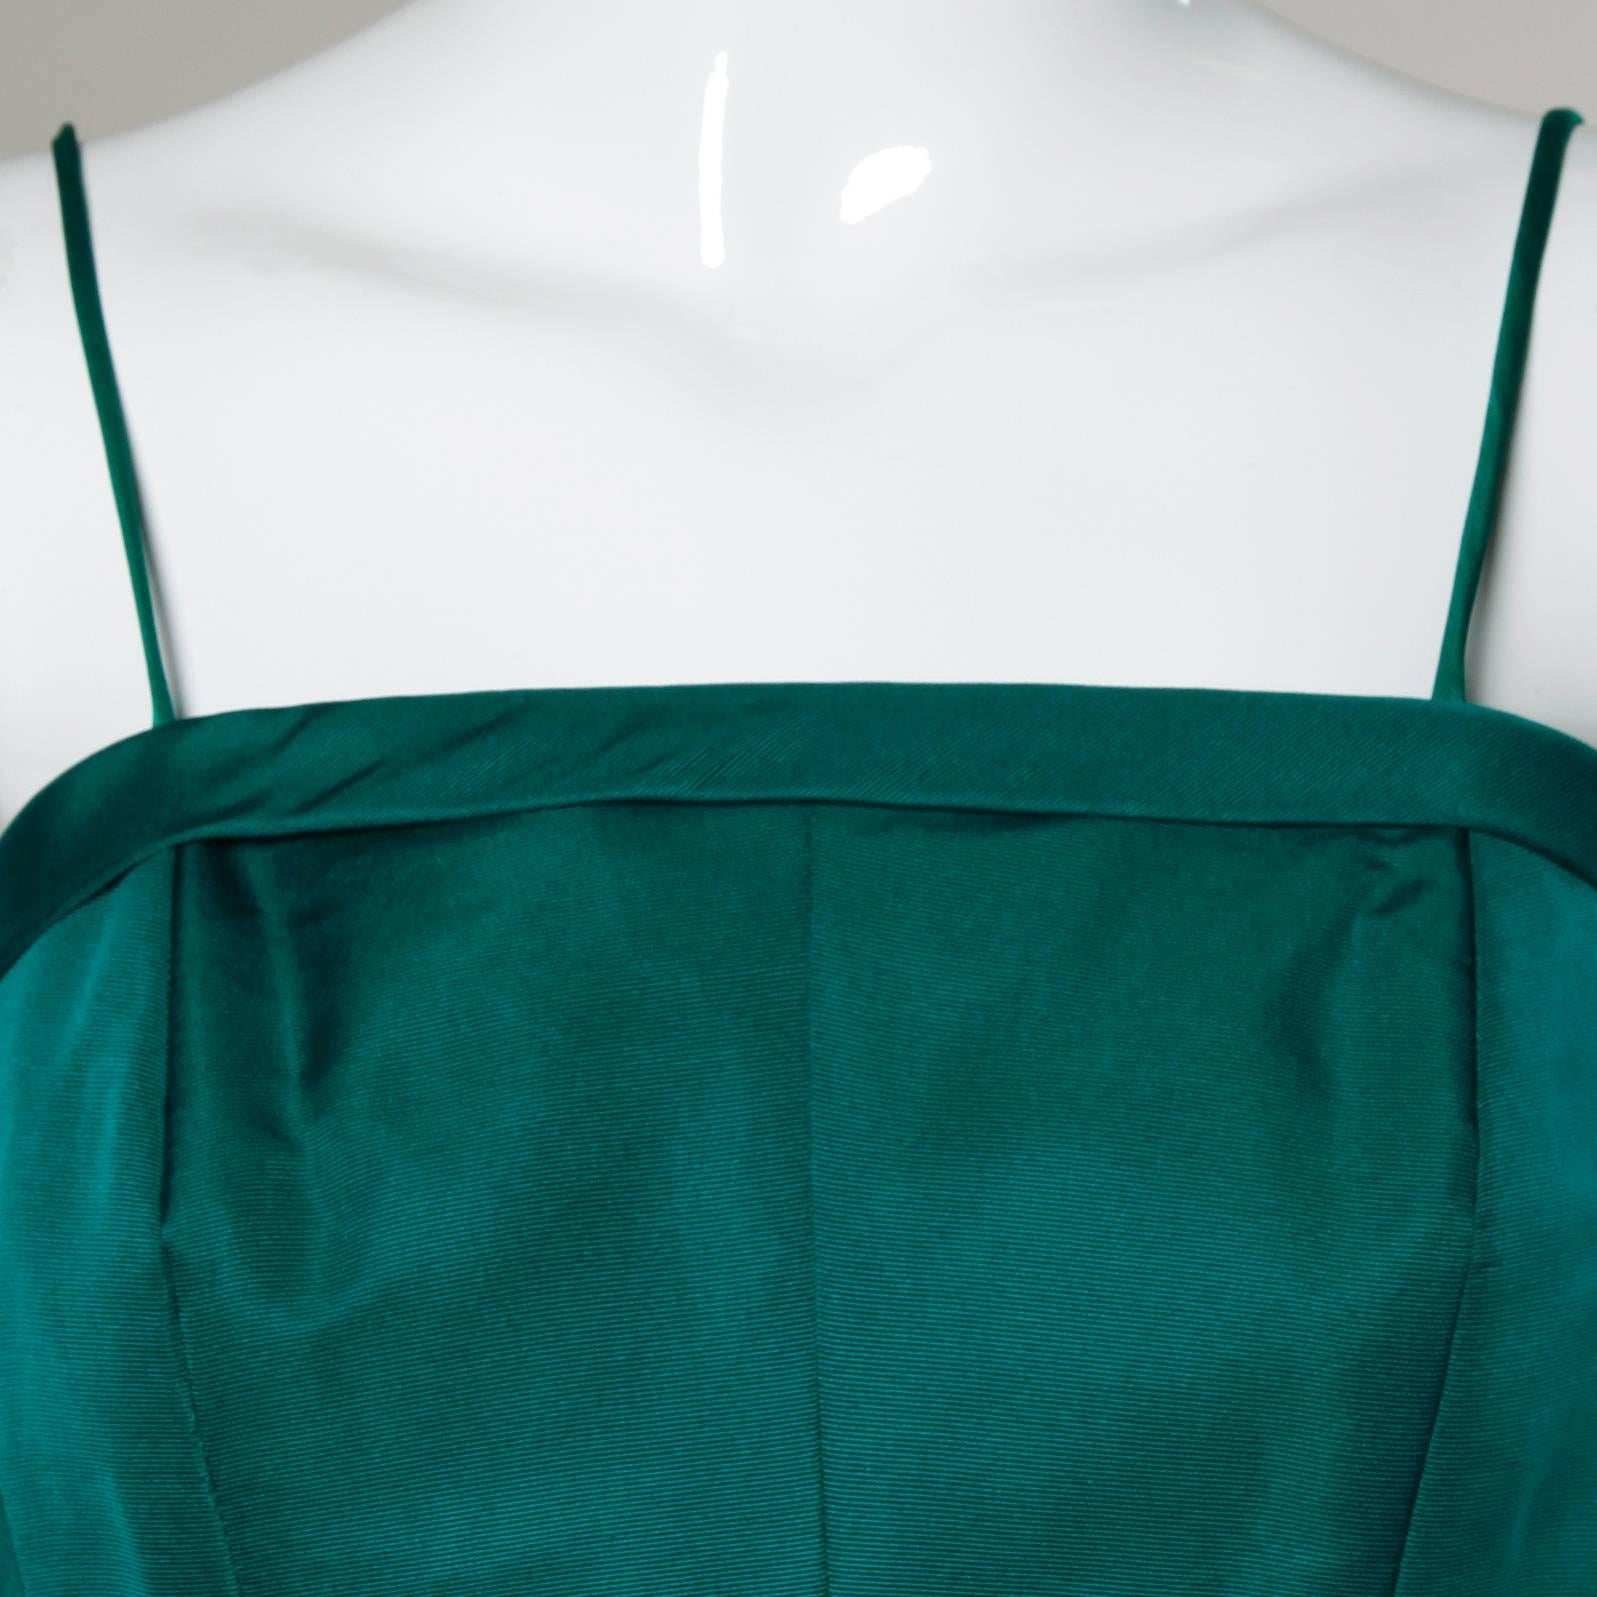 Women's Suzy Perette Vintage Green Silk Cocktail Dress with an Origami Bubble Hem, 1950s